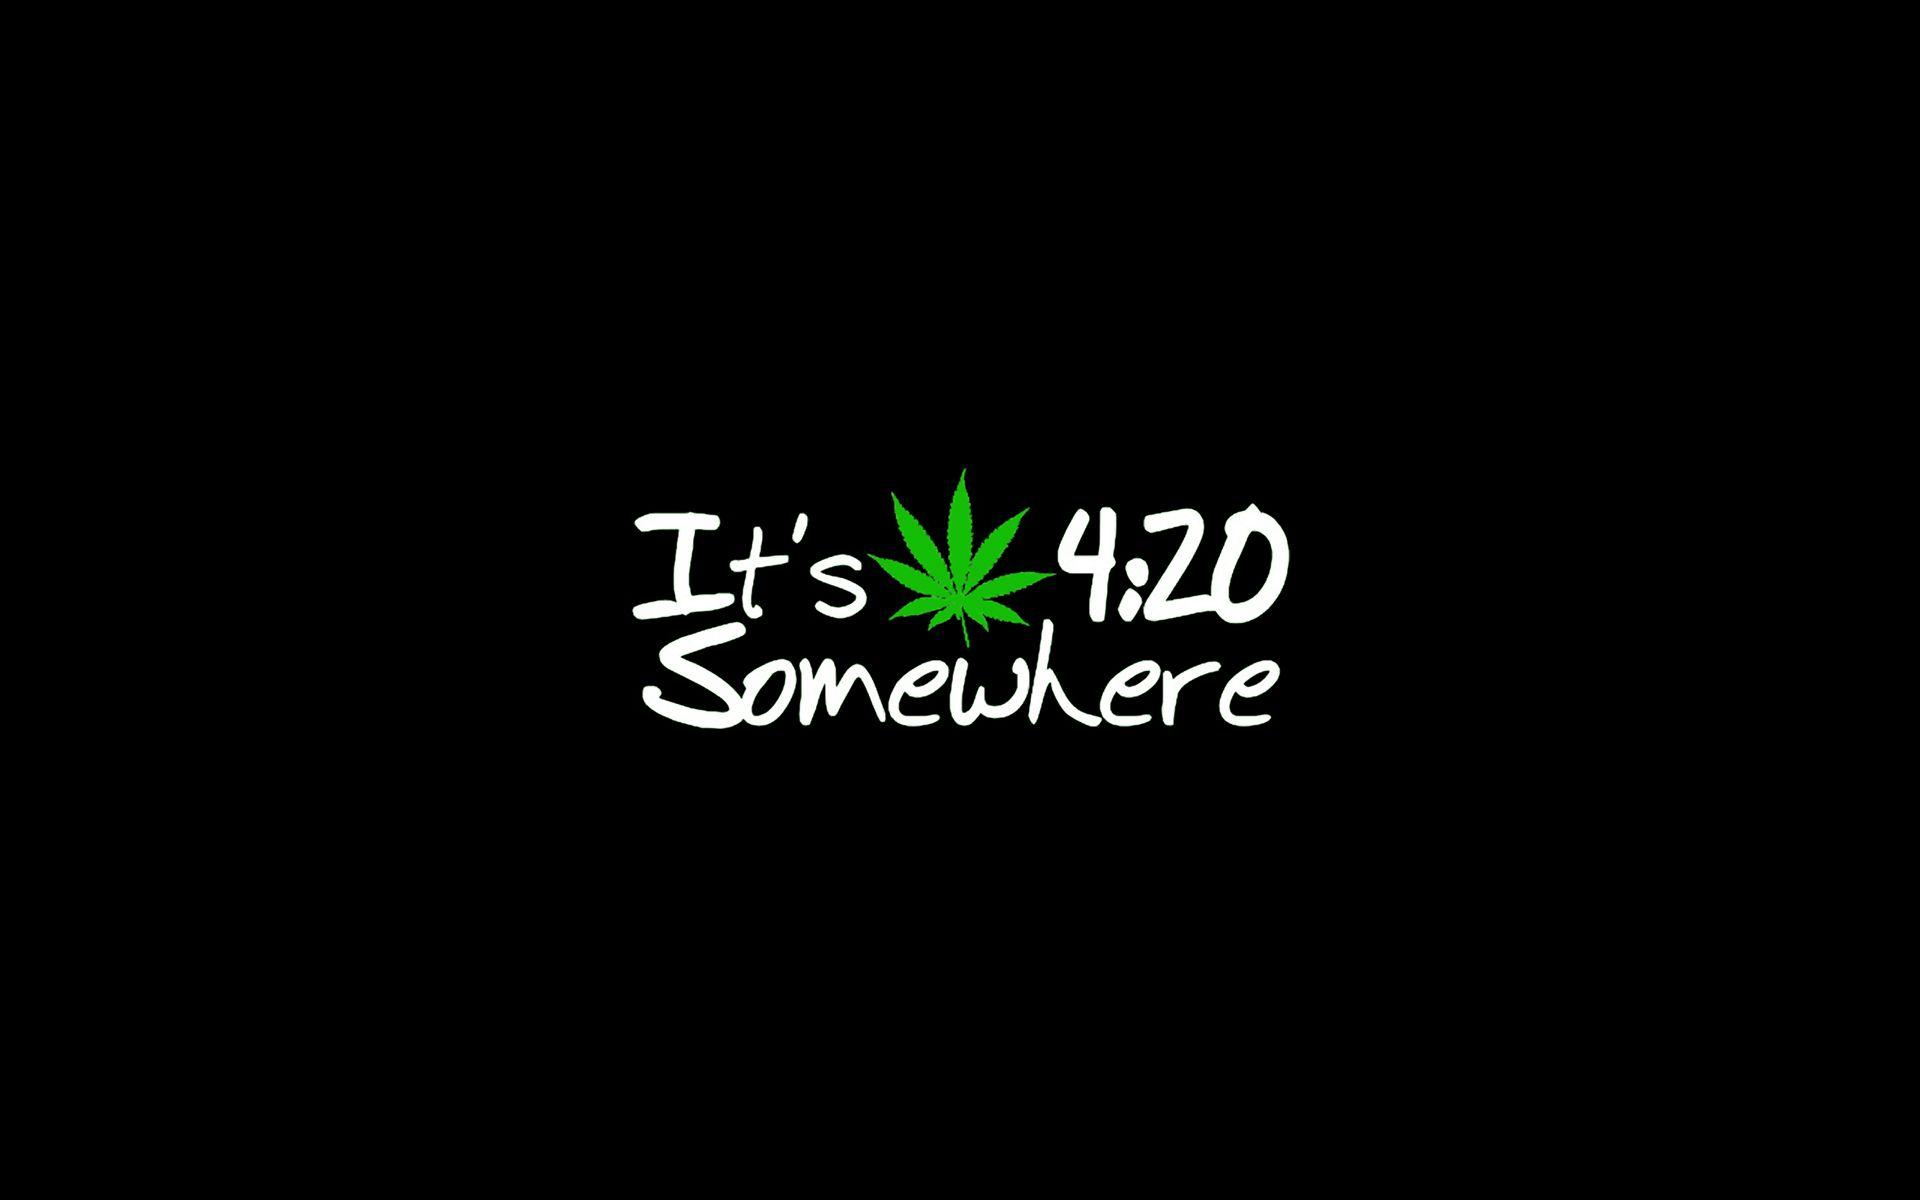 Download the Its 420 Somewhere Wallpaper, Its 420 Somewhere iPhone